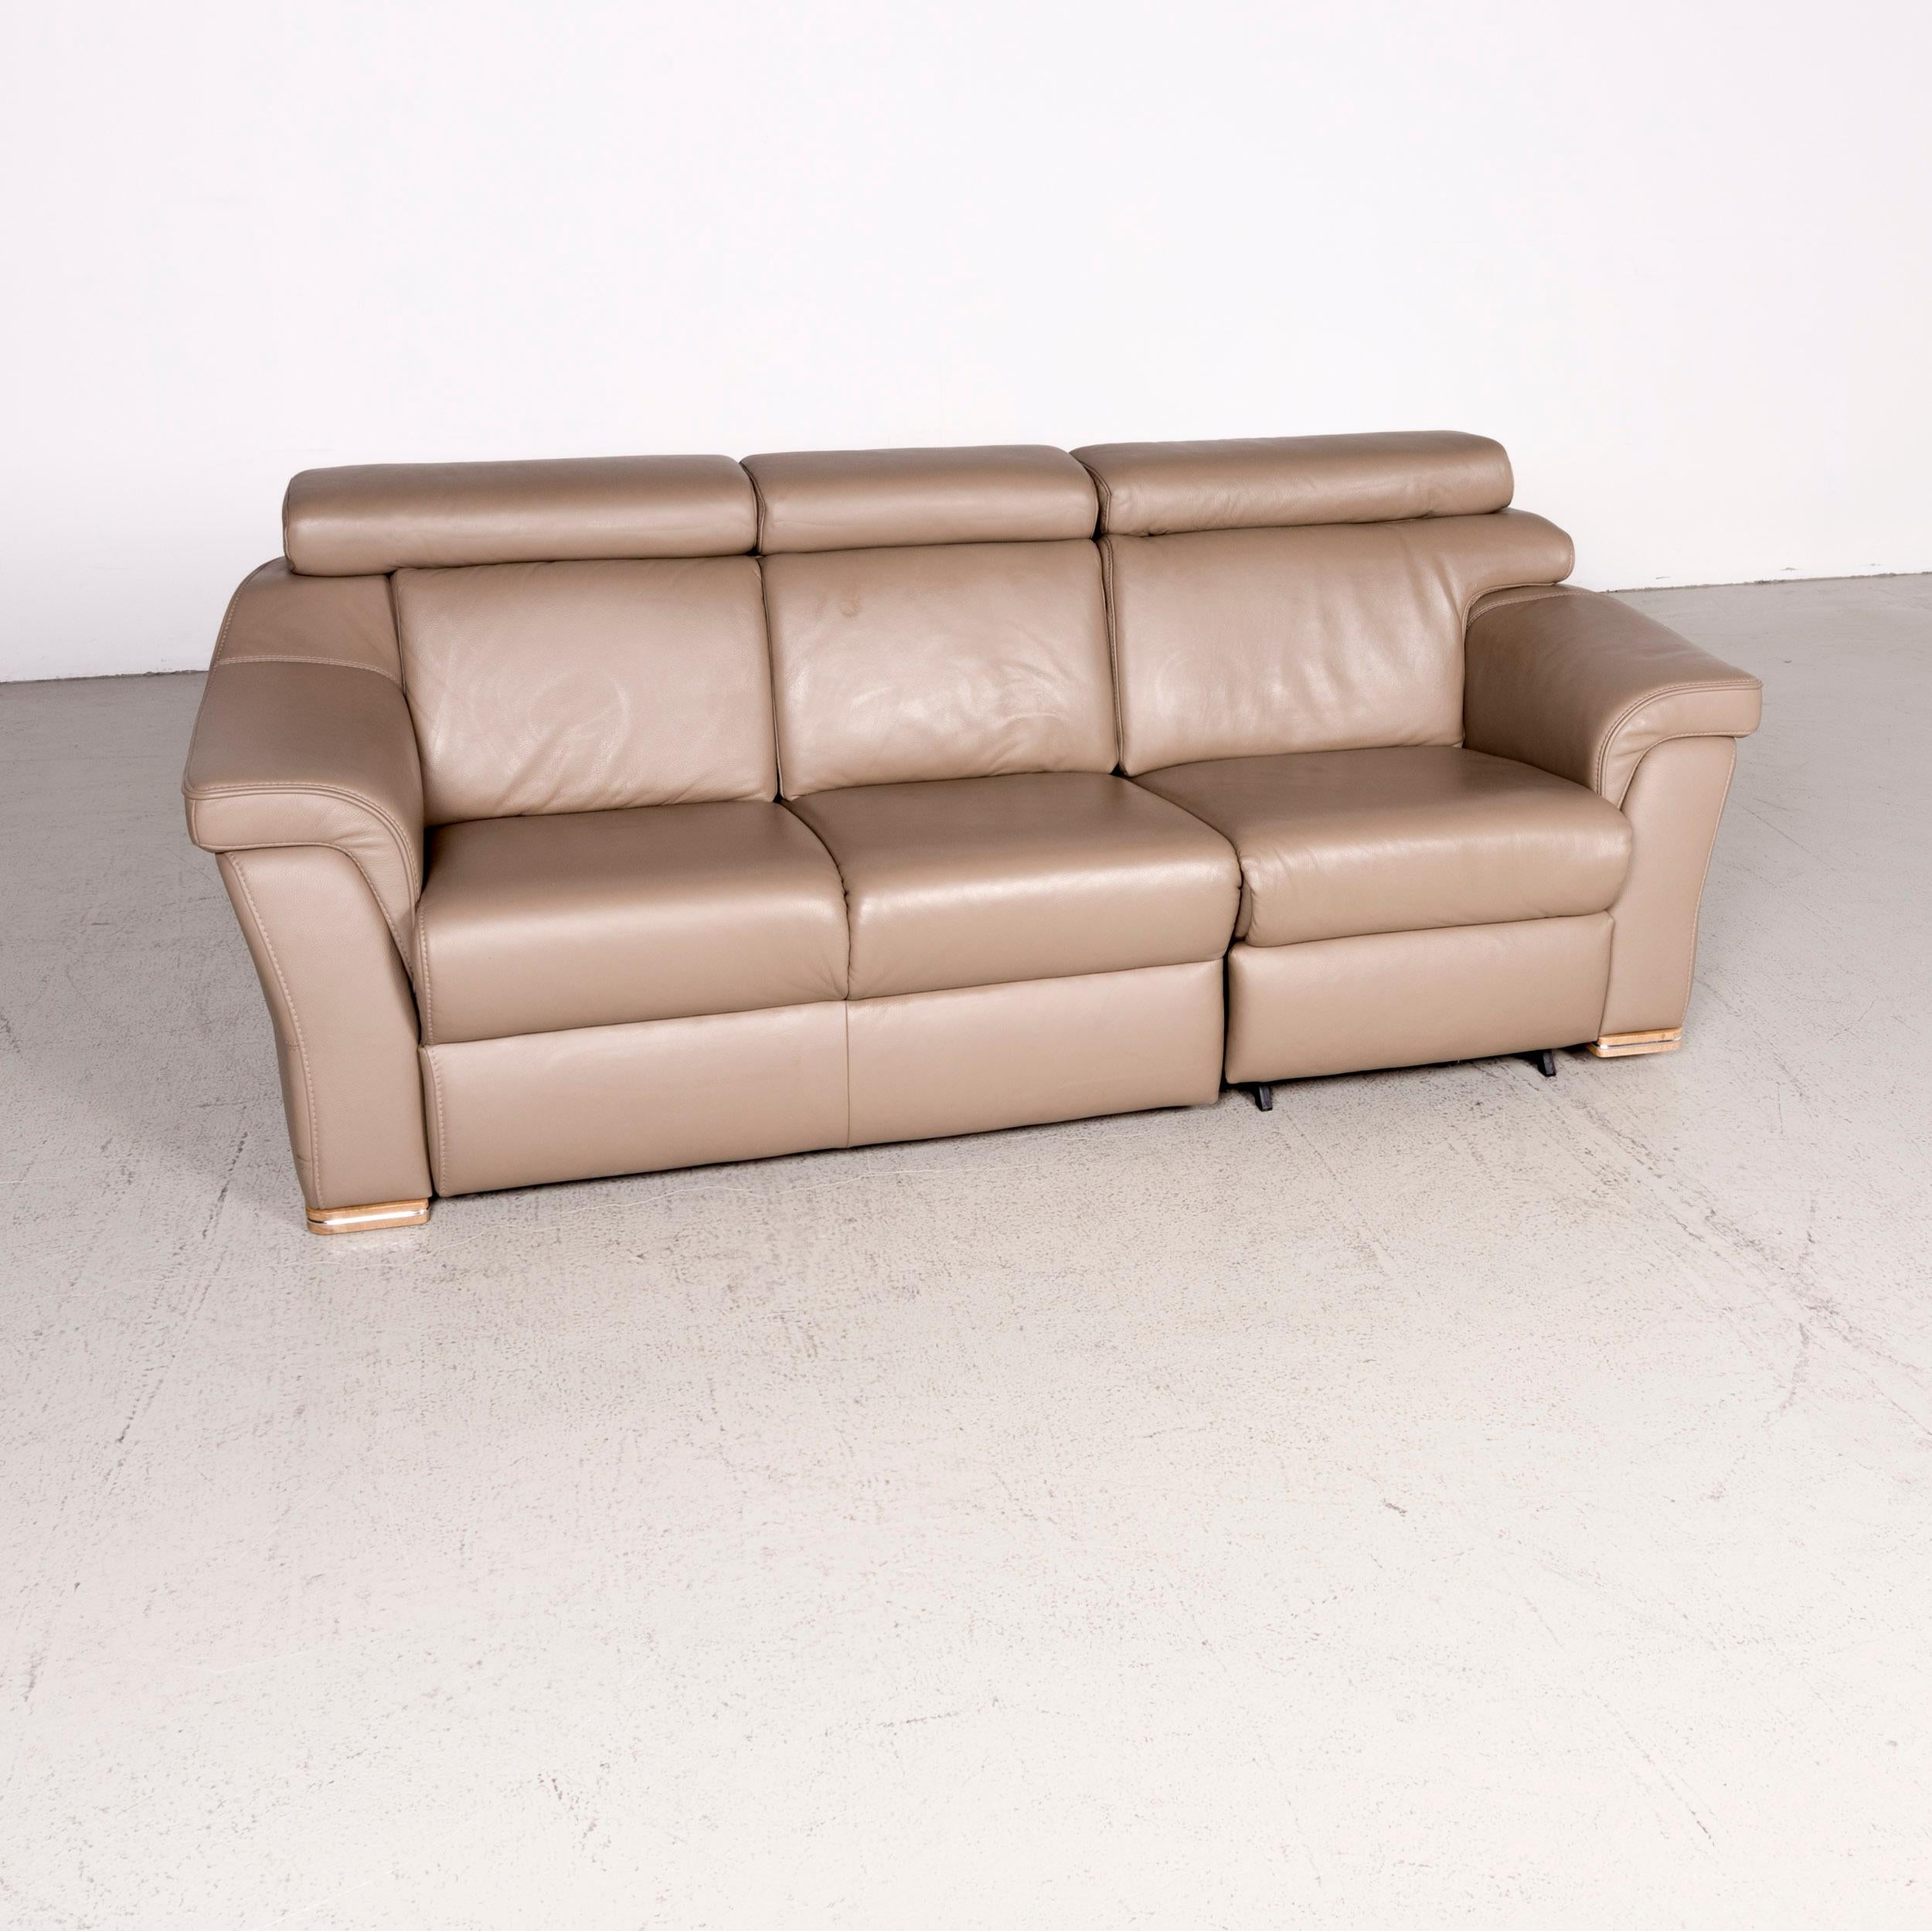 We bring to you a Himolla designer leather sofa set brown genuine leather two-seat three-seat.

Product measurements in centimeters:

Depth 95
Width 220
Height 85
Seat-height 45
Rest-height 60
Seat-depth 50
Seat-width 160
Back-height